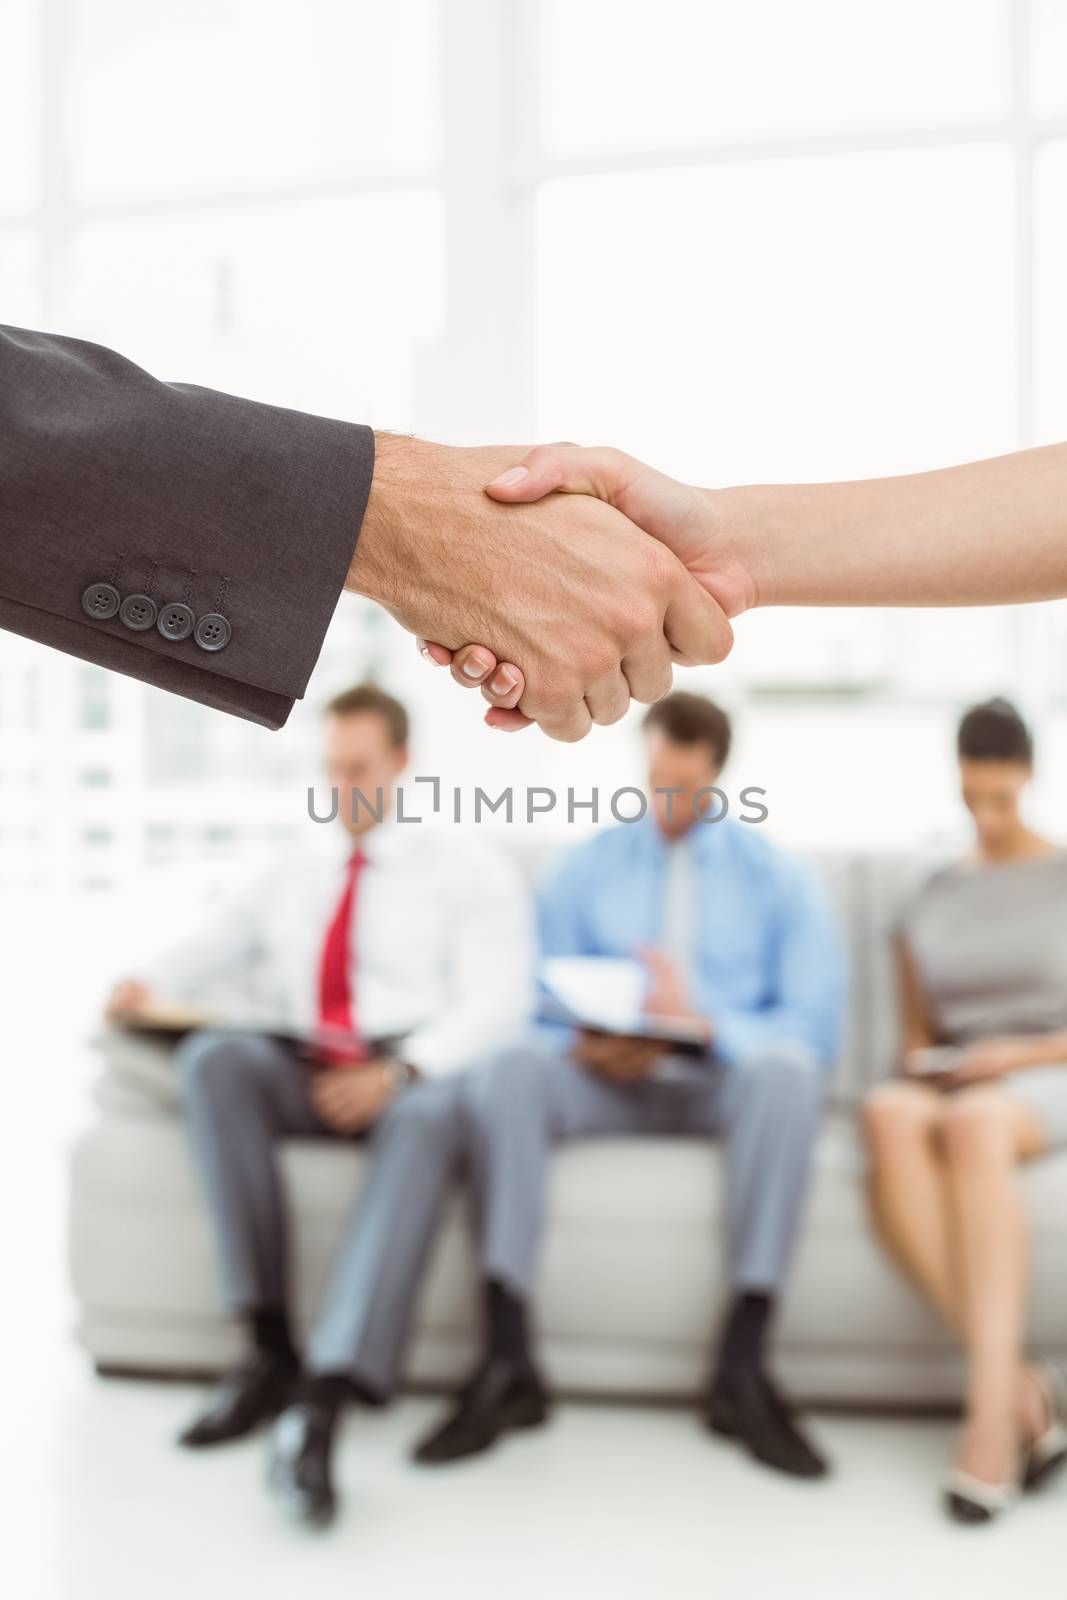 Handshake besides people waiting for job interview in office